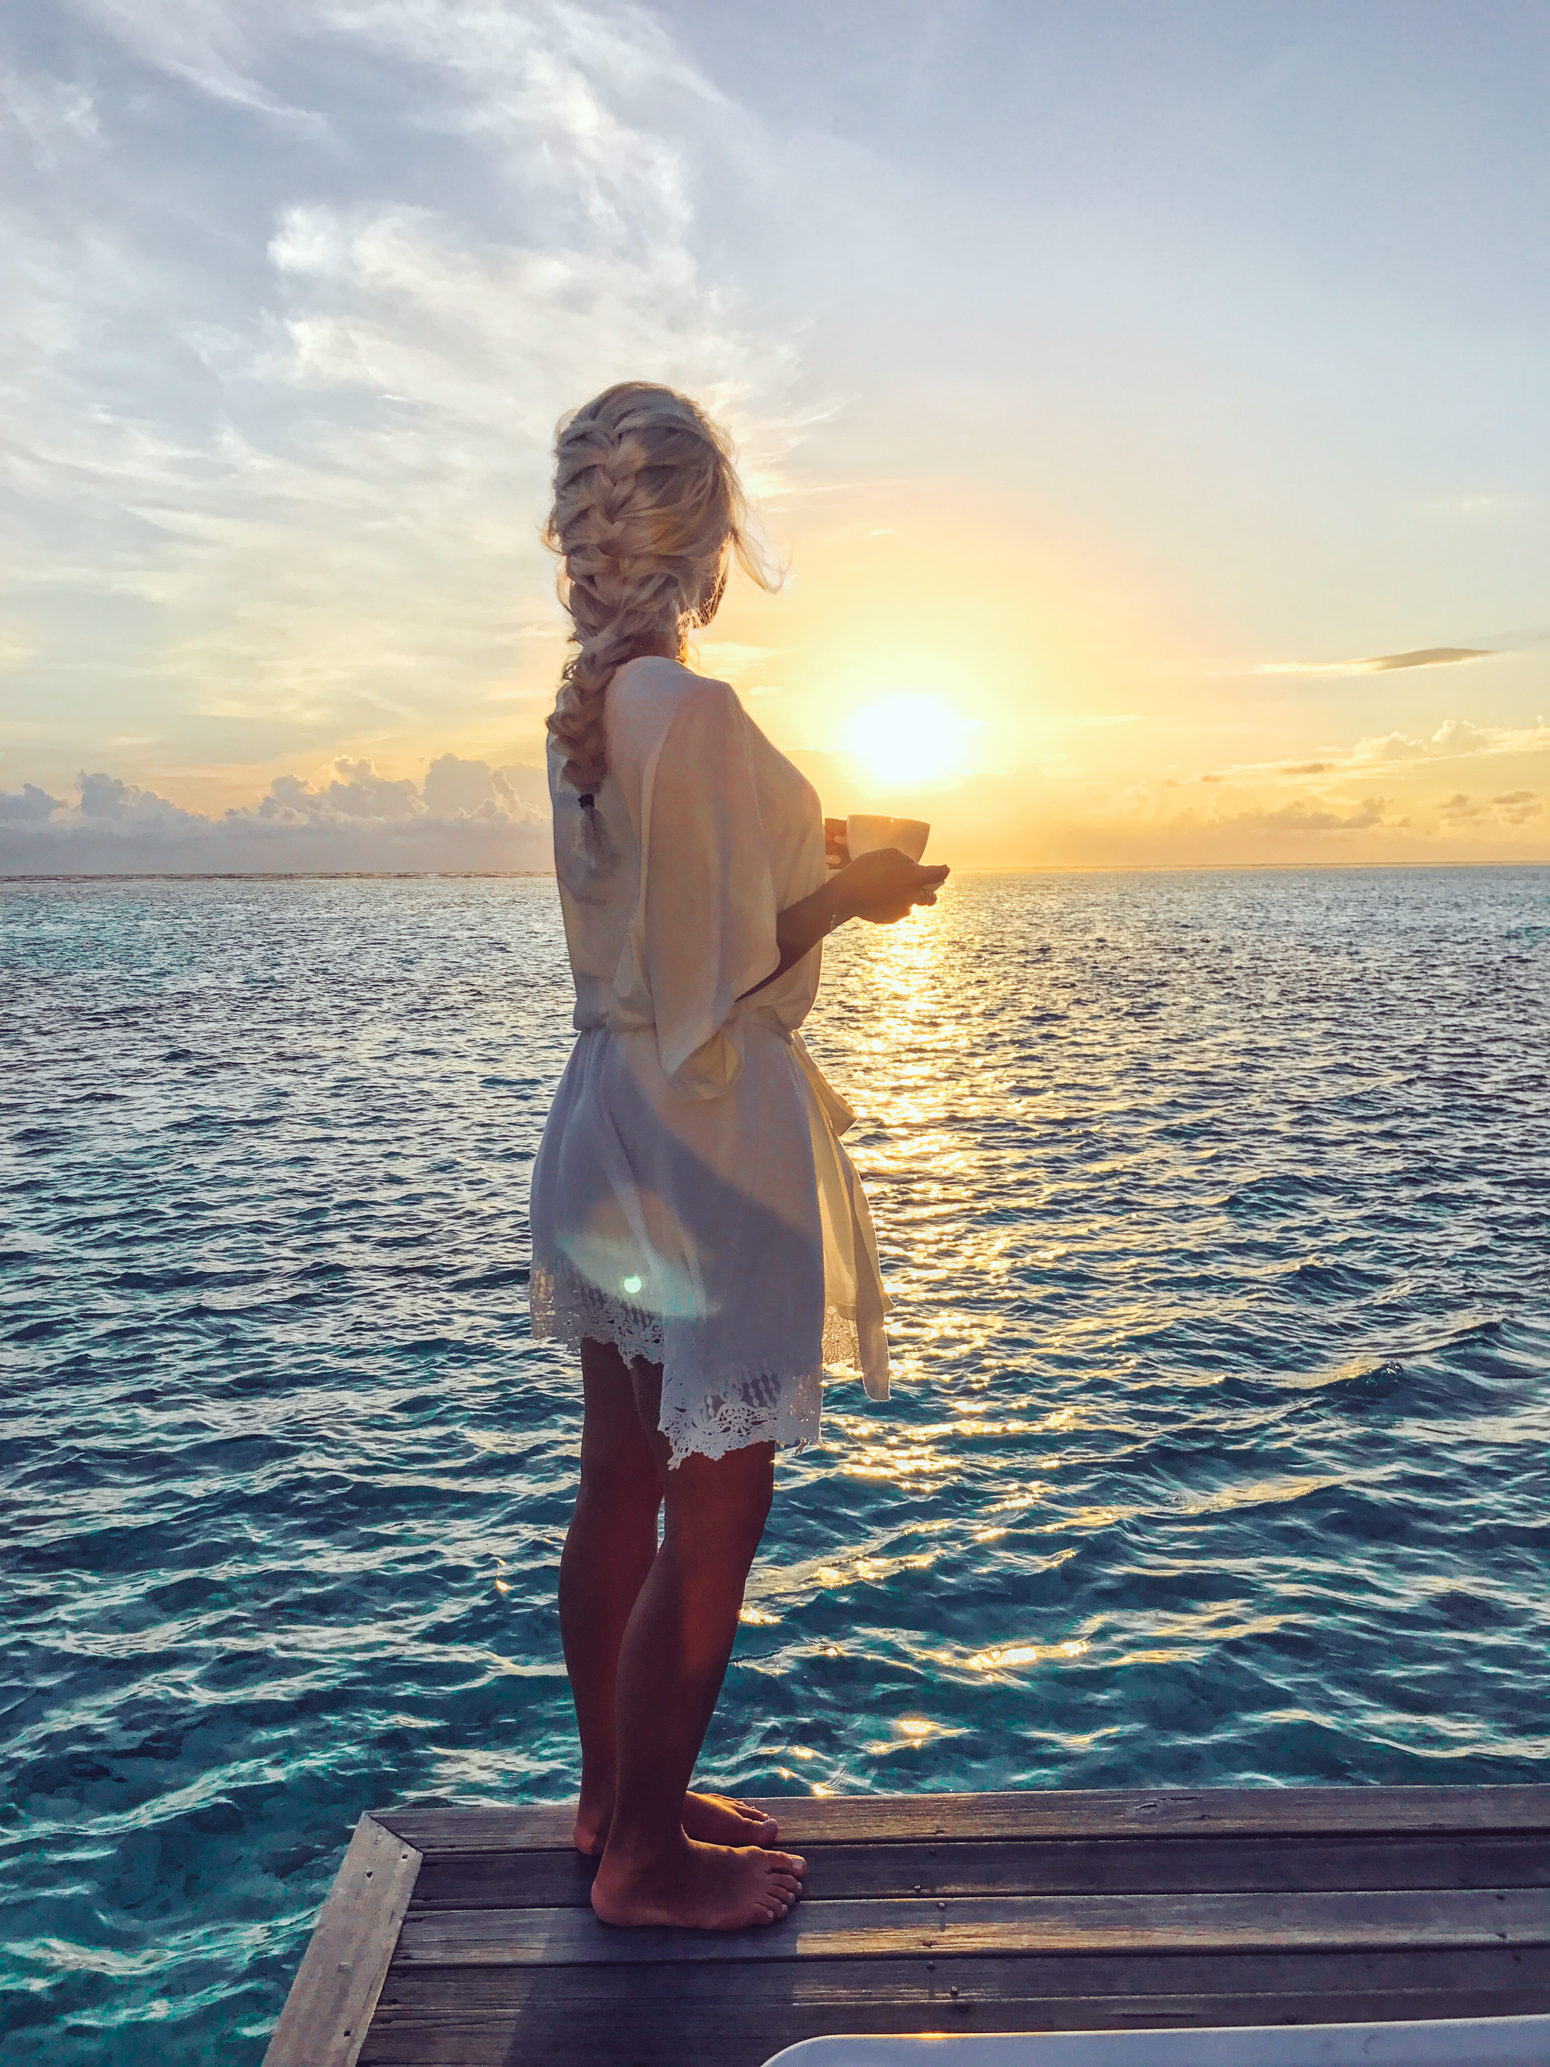 Blondie in the City | Honeymoon Vibes | The Maldives | Married Life | Sunset